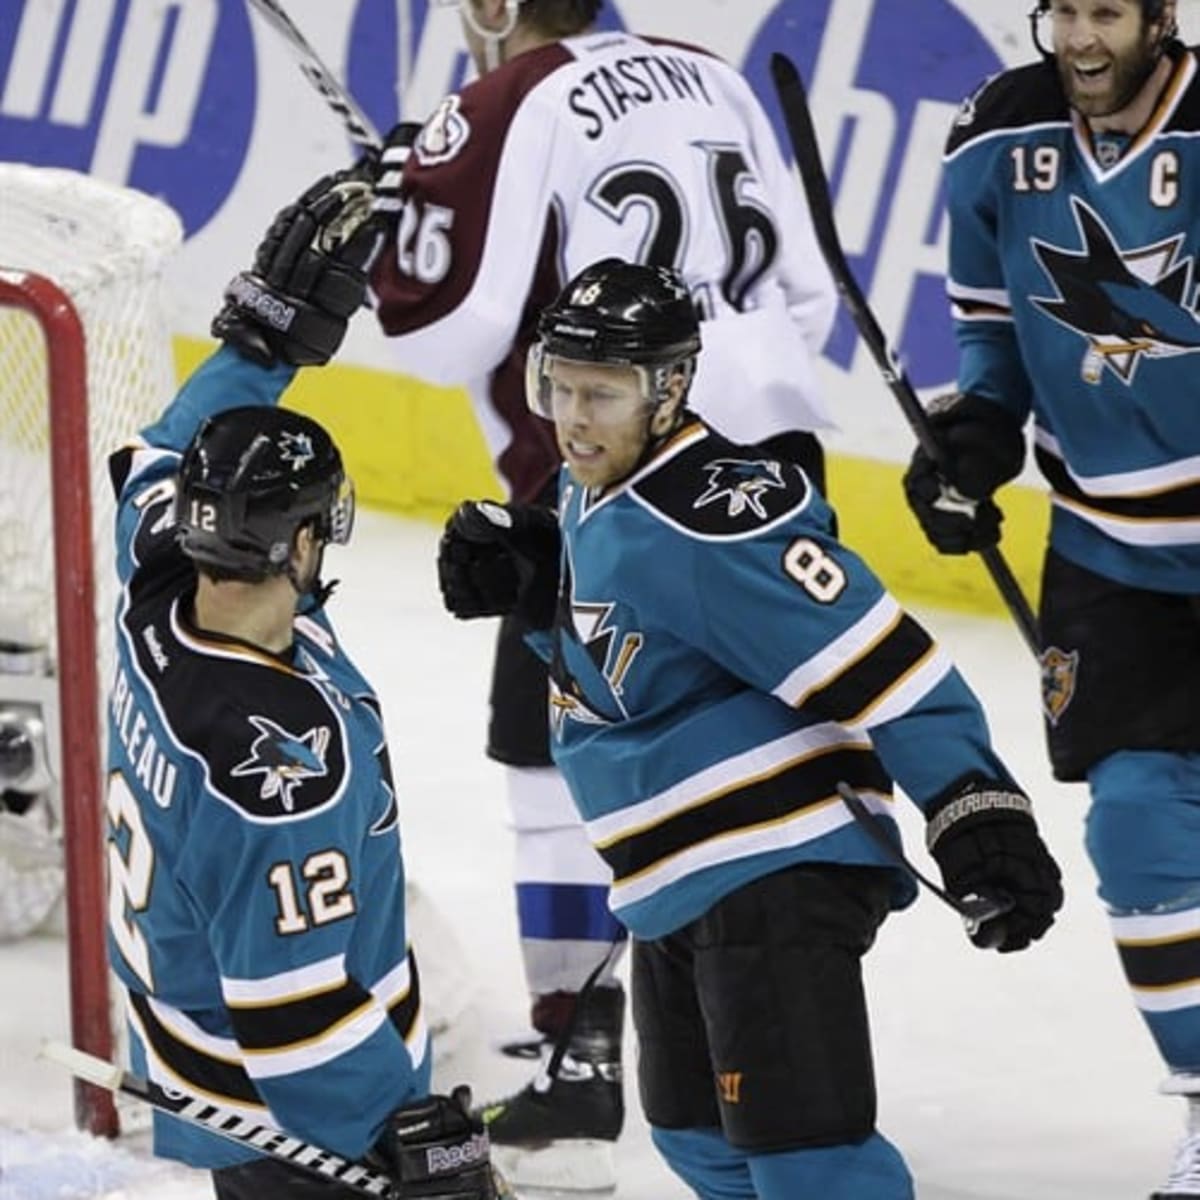 Joe Thornton's line leads Sharks to victory over Avalanche in Game 1